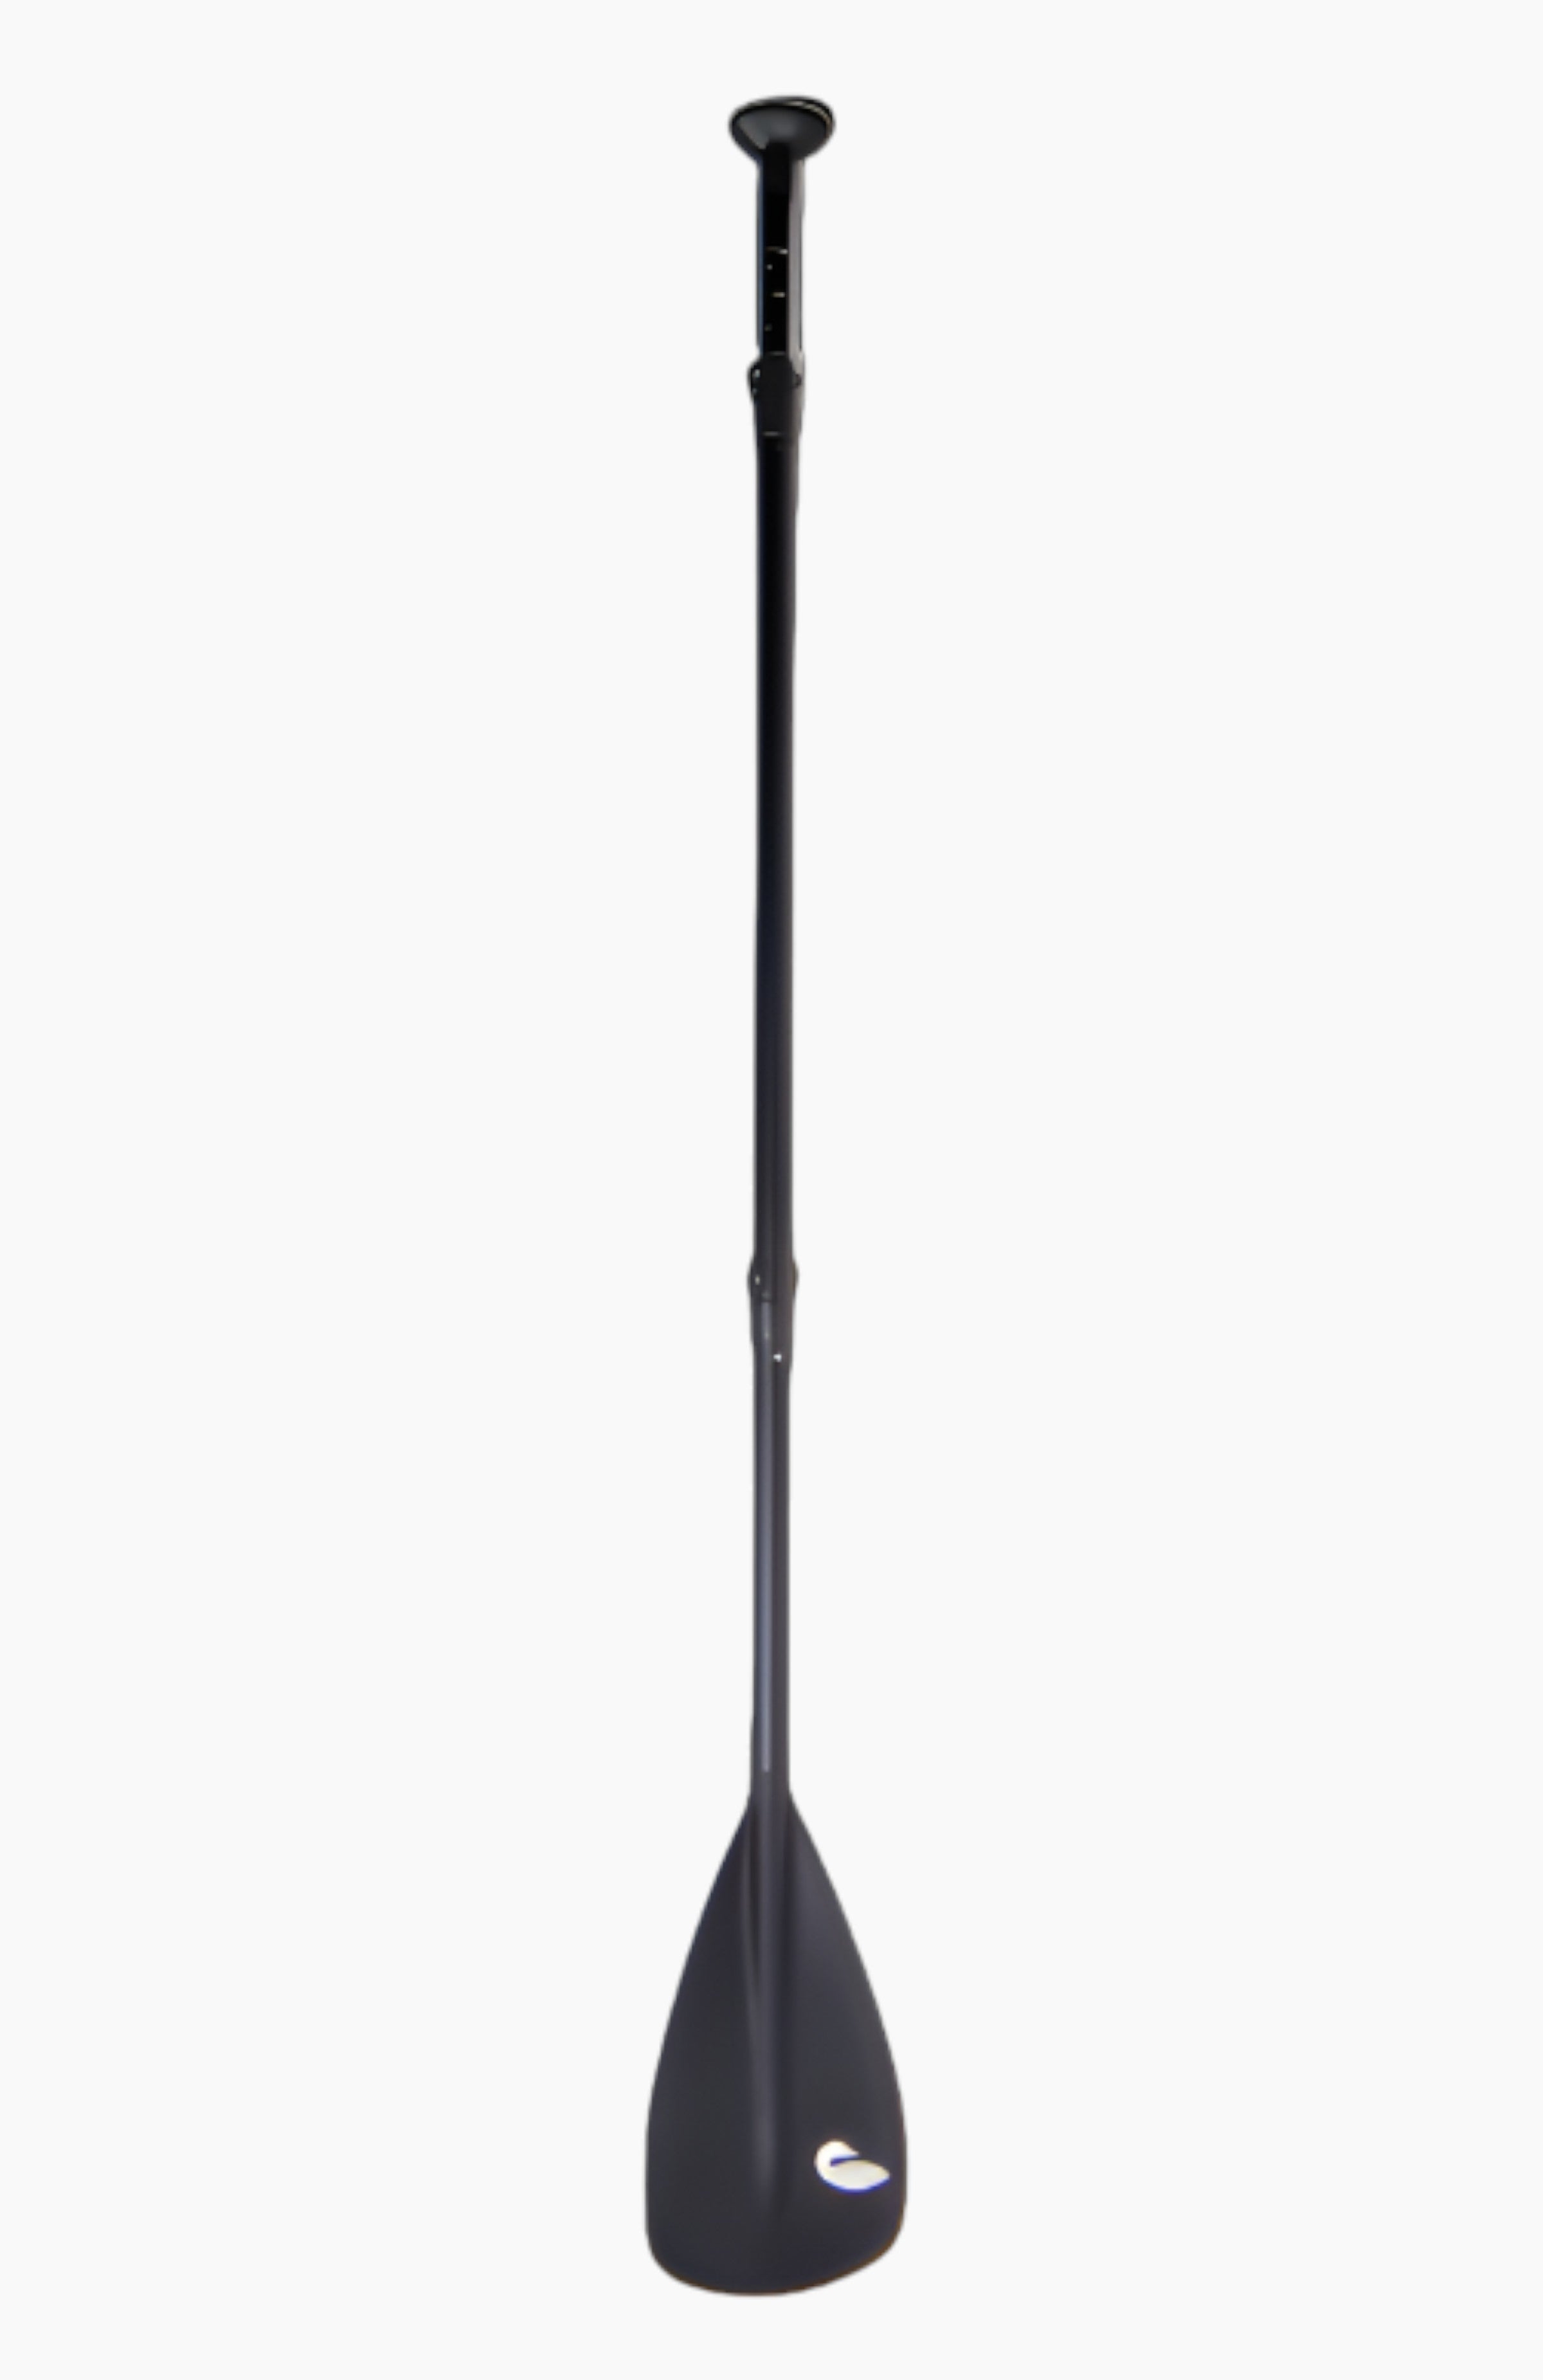 Paddle board accessories: All black paddle with small loon logo on bottom of the paddle.